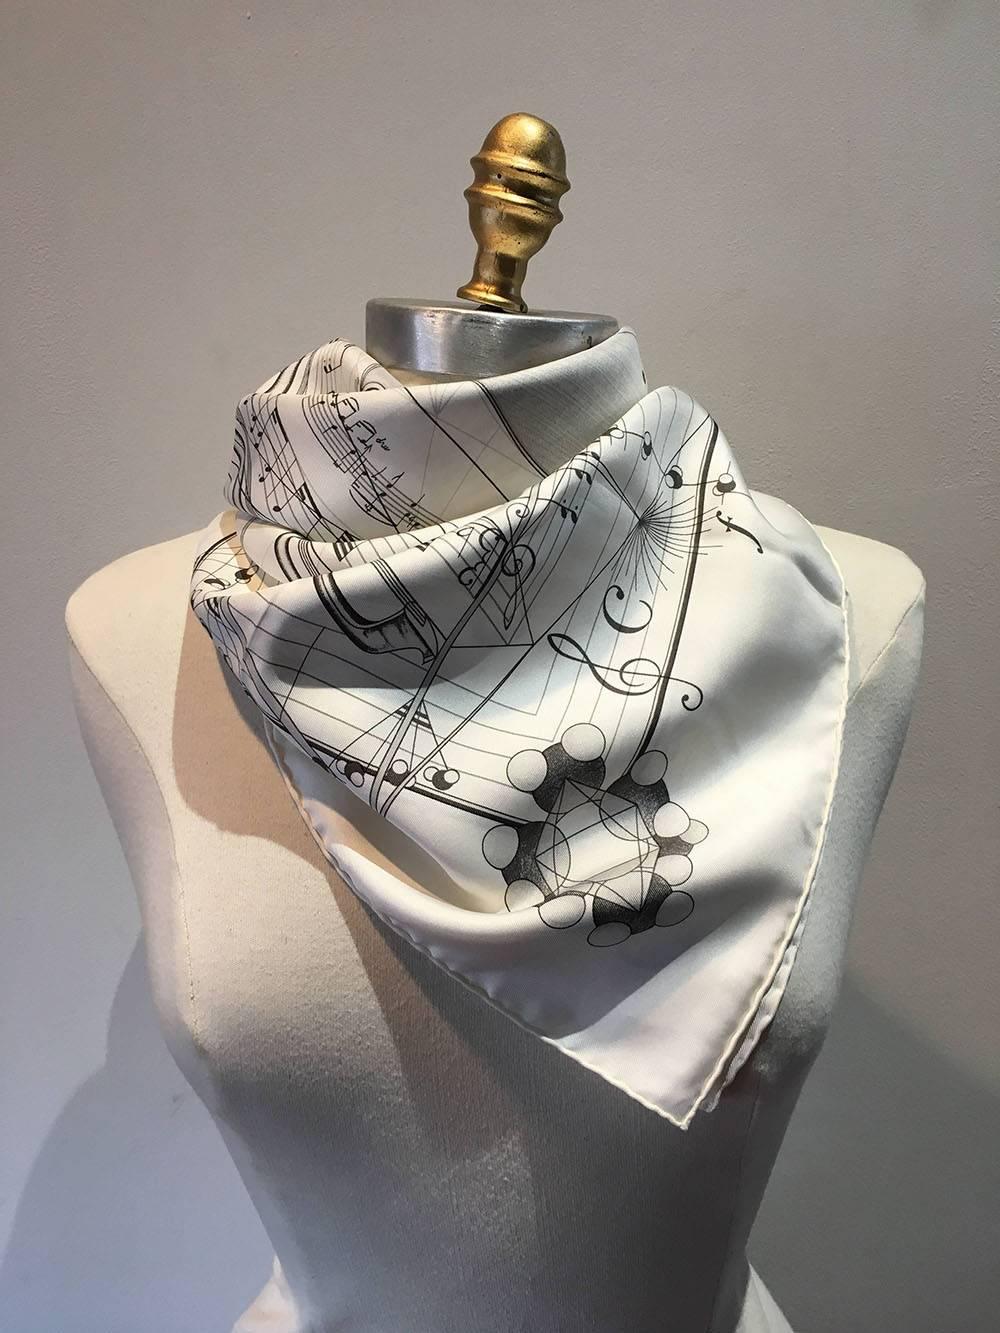 CLASSIC Hermes La Musique Des Spheres White Silk Scarf c1996 in excellent condition. Original silk screen design c1996 by Zoé Pauwels features a black sketch style rendering centered Violin design surrounded by music notes, lines, clefs, and other